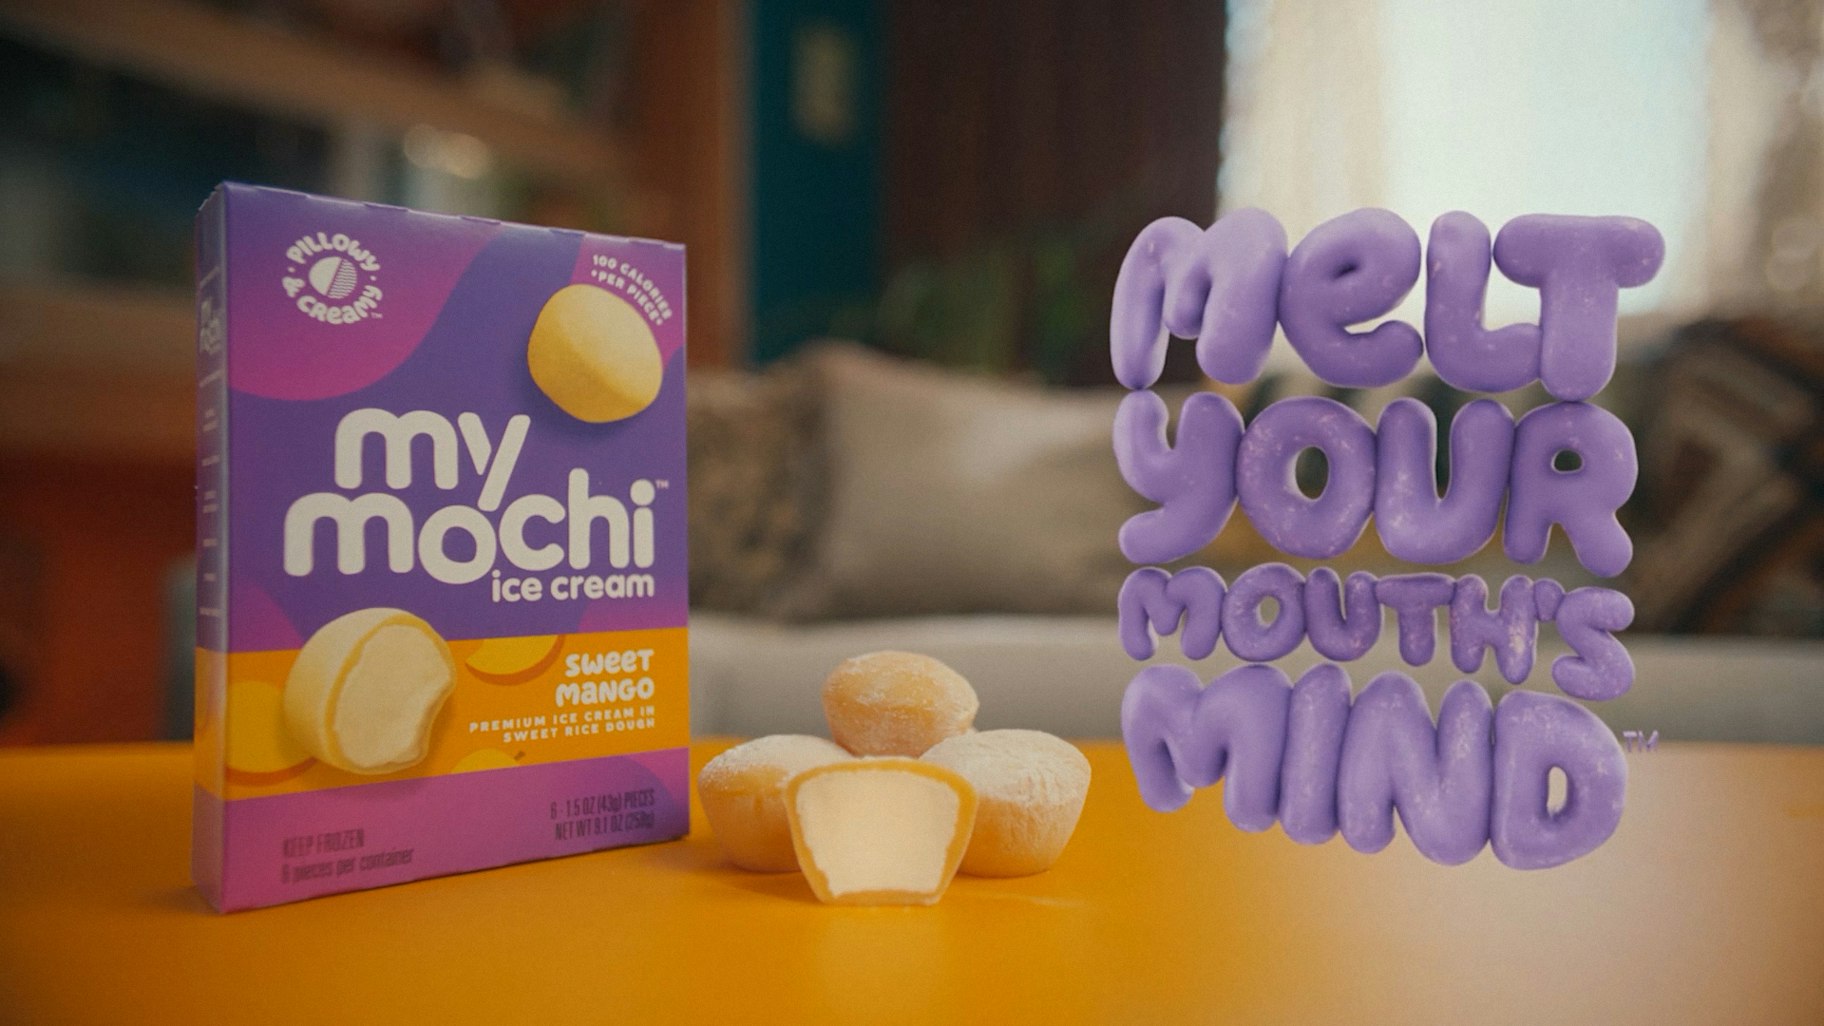 My/Mochi 'Melt Your Mouth's Mind' -